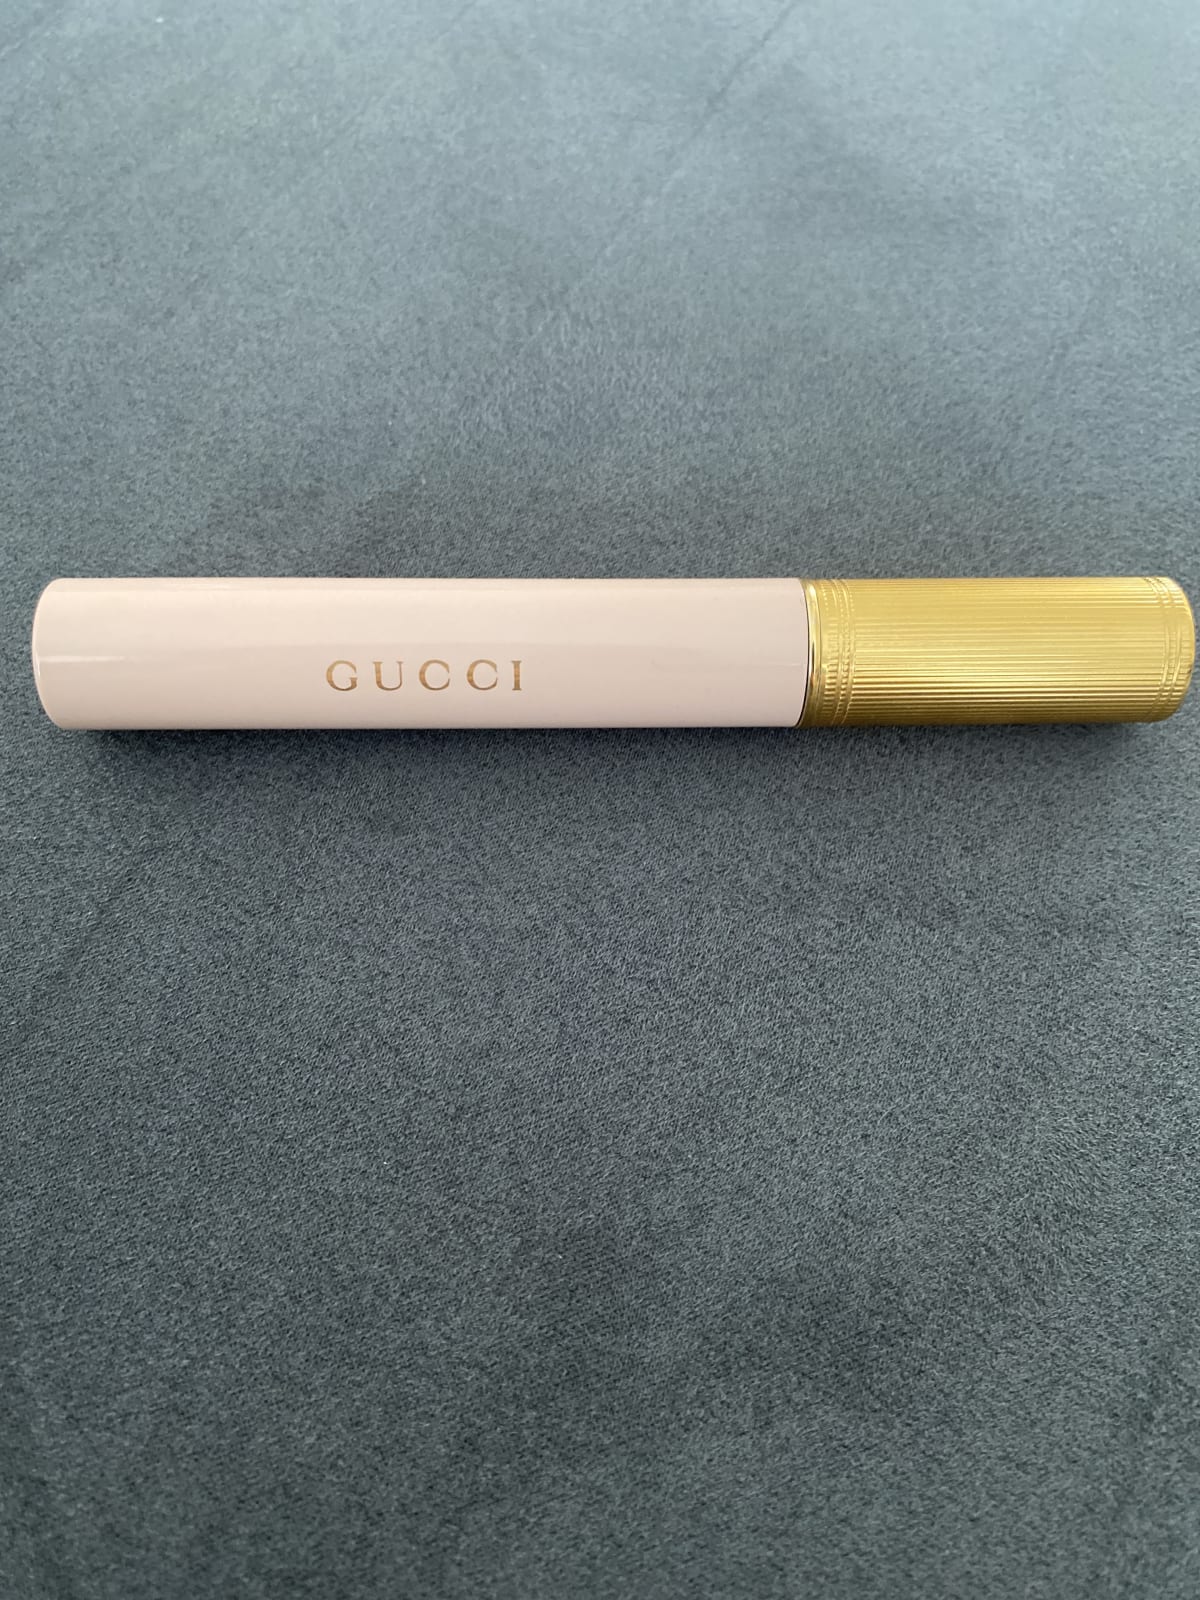 Gucci Gucci Beauty Mascara L'Obscur - review image